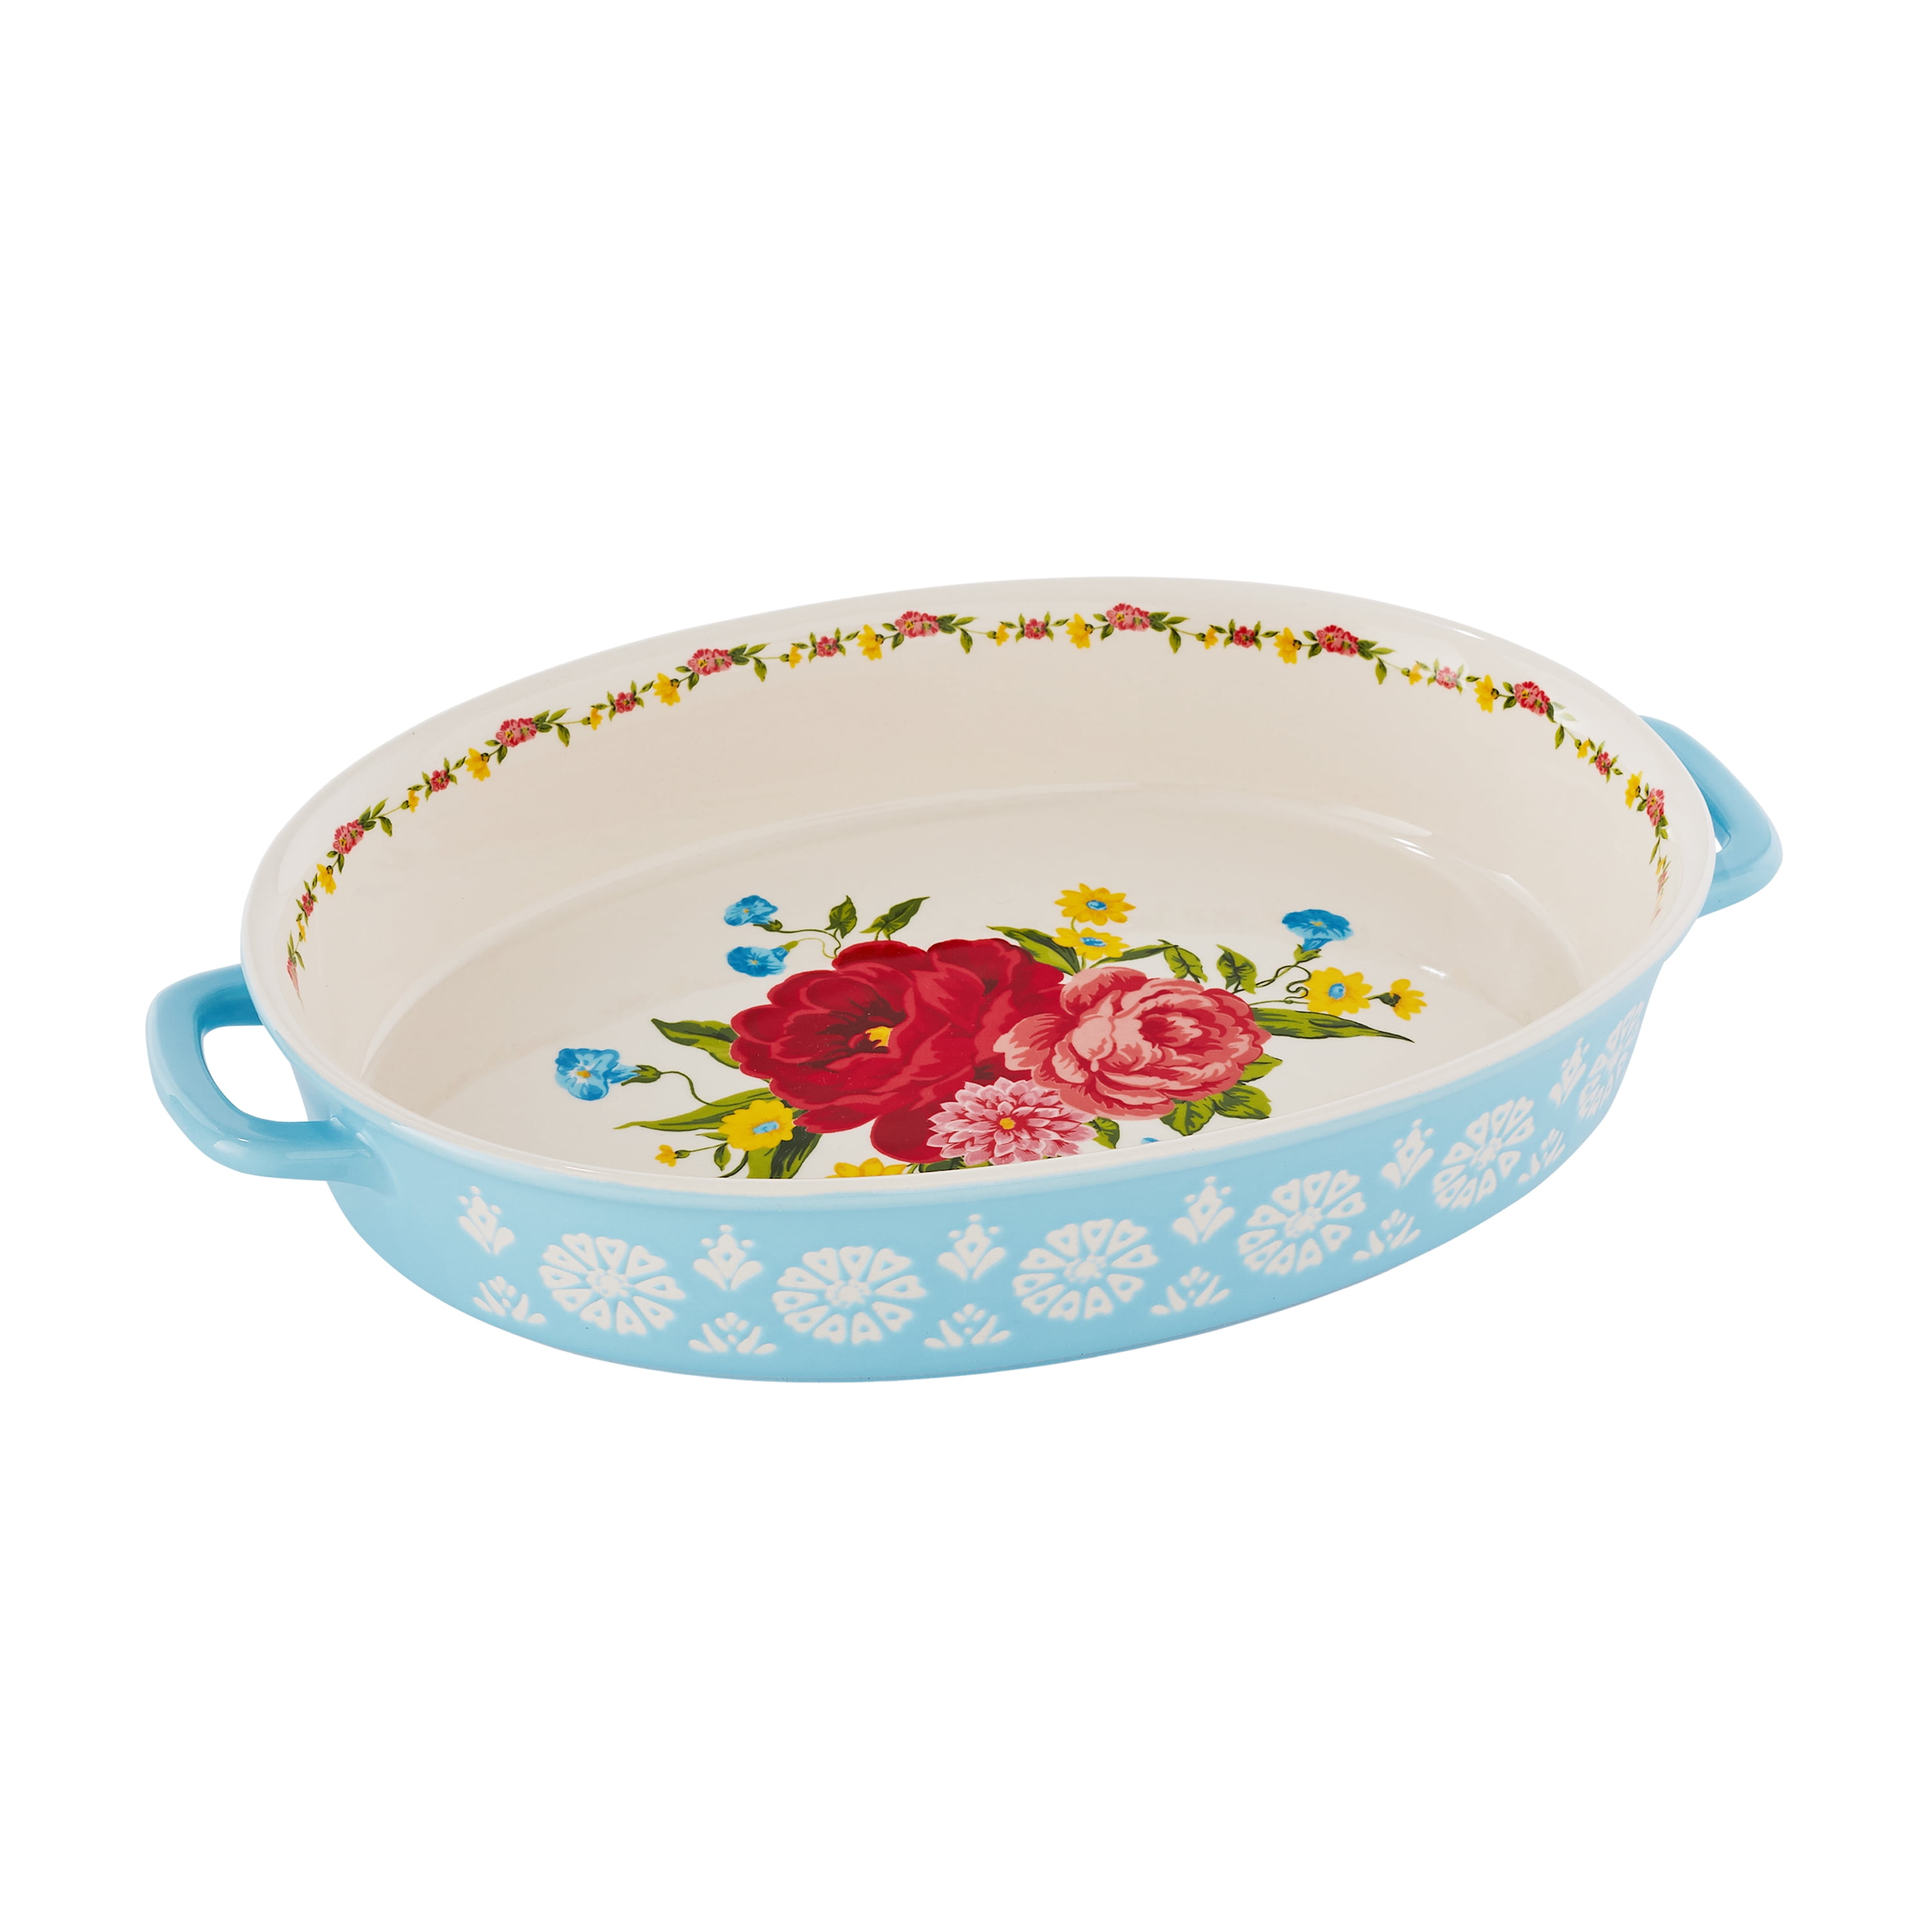 The Pioneer Woman Fiona Floral 2-Piece Ceramic Oval Bakers Set